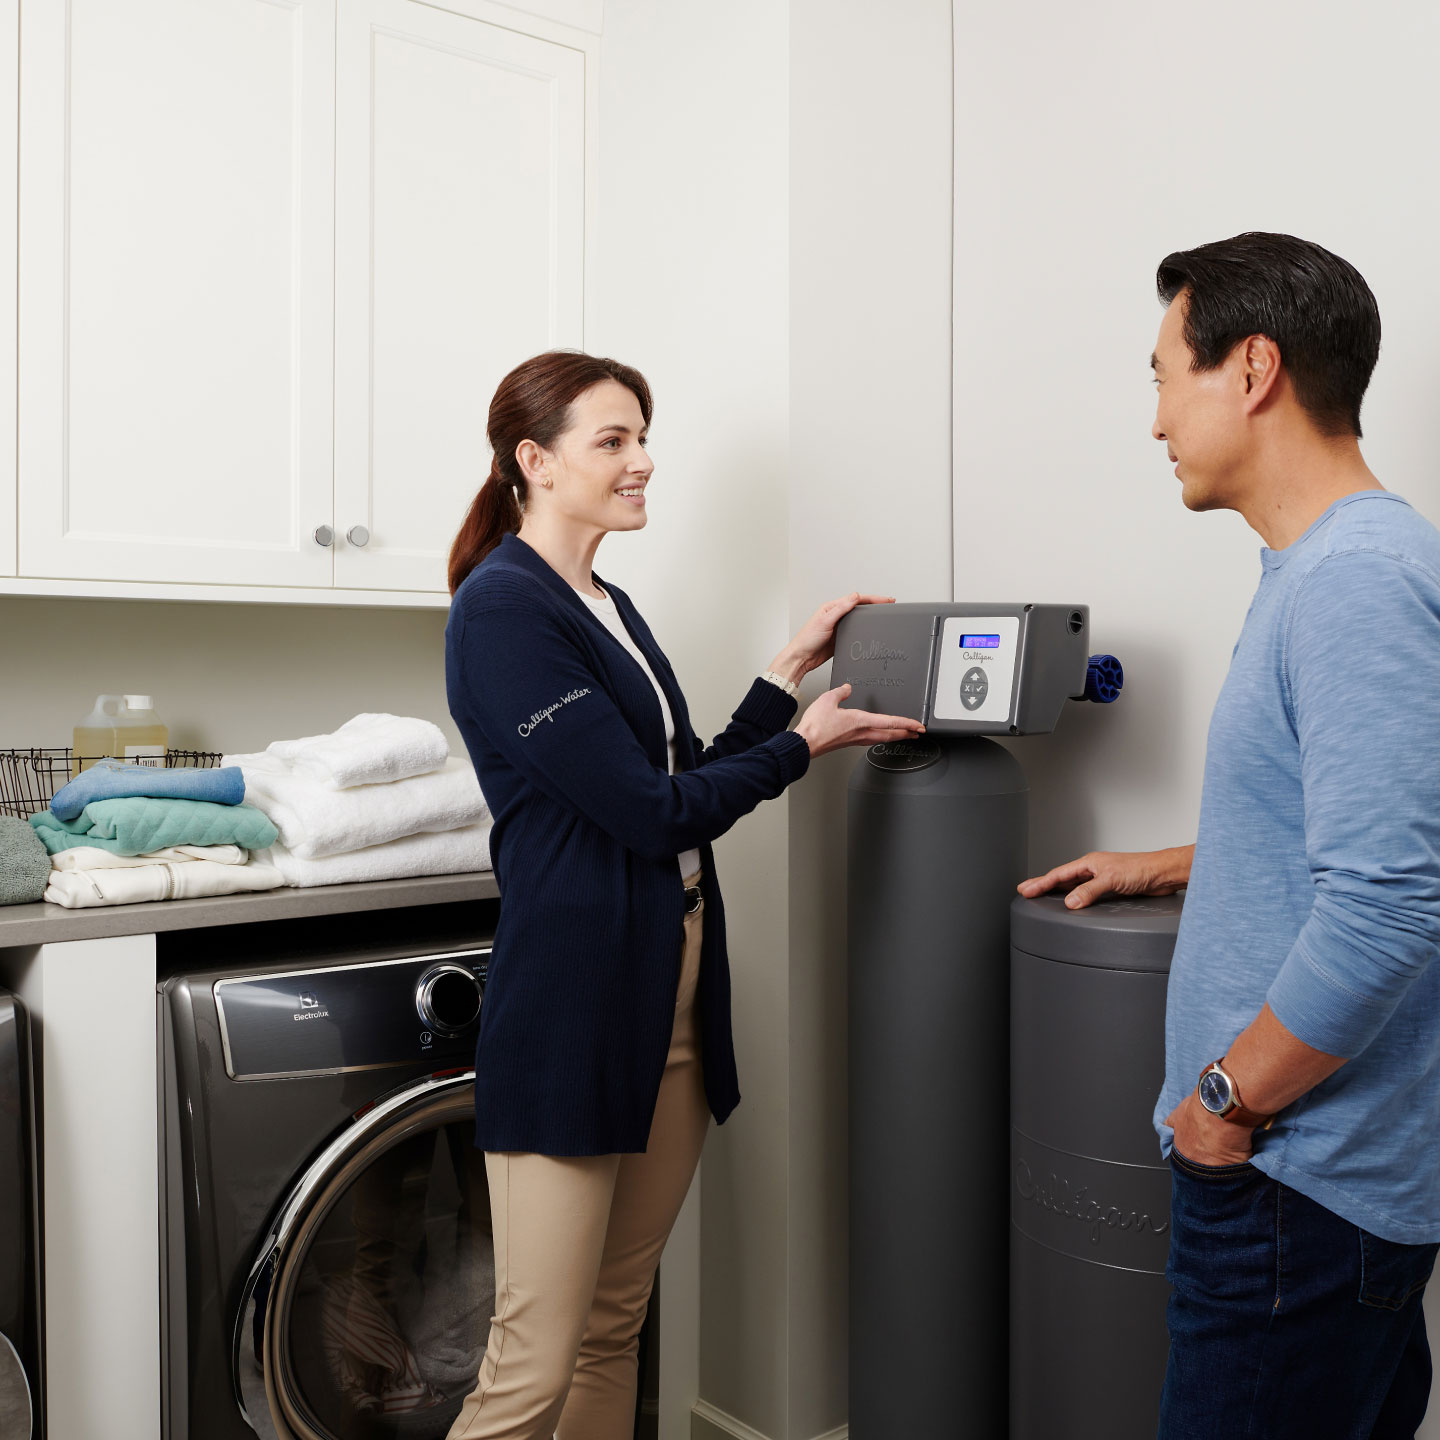 Culligan Dealer Explaining to a Customer how a Water Softener Works